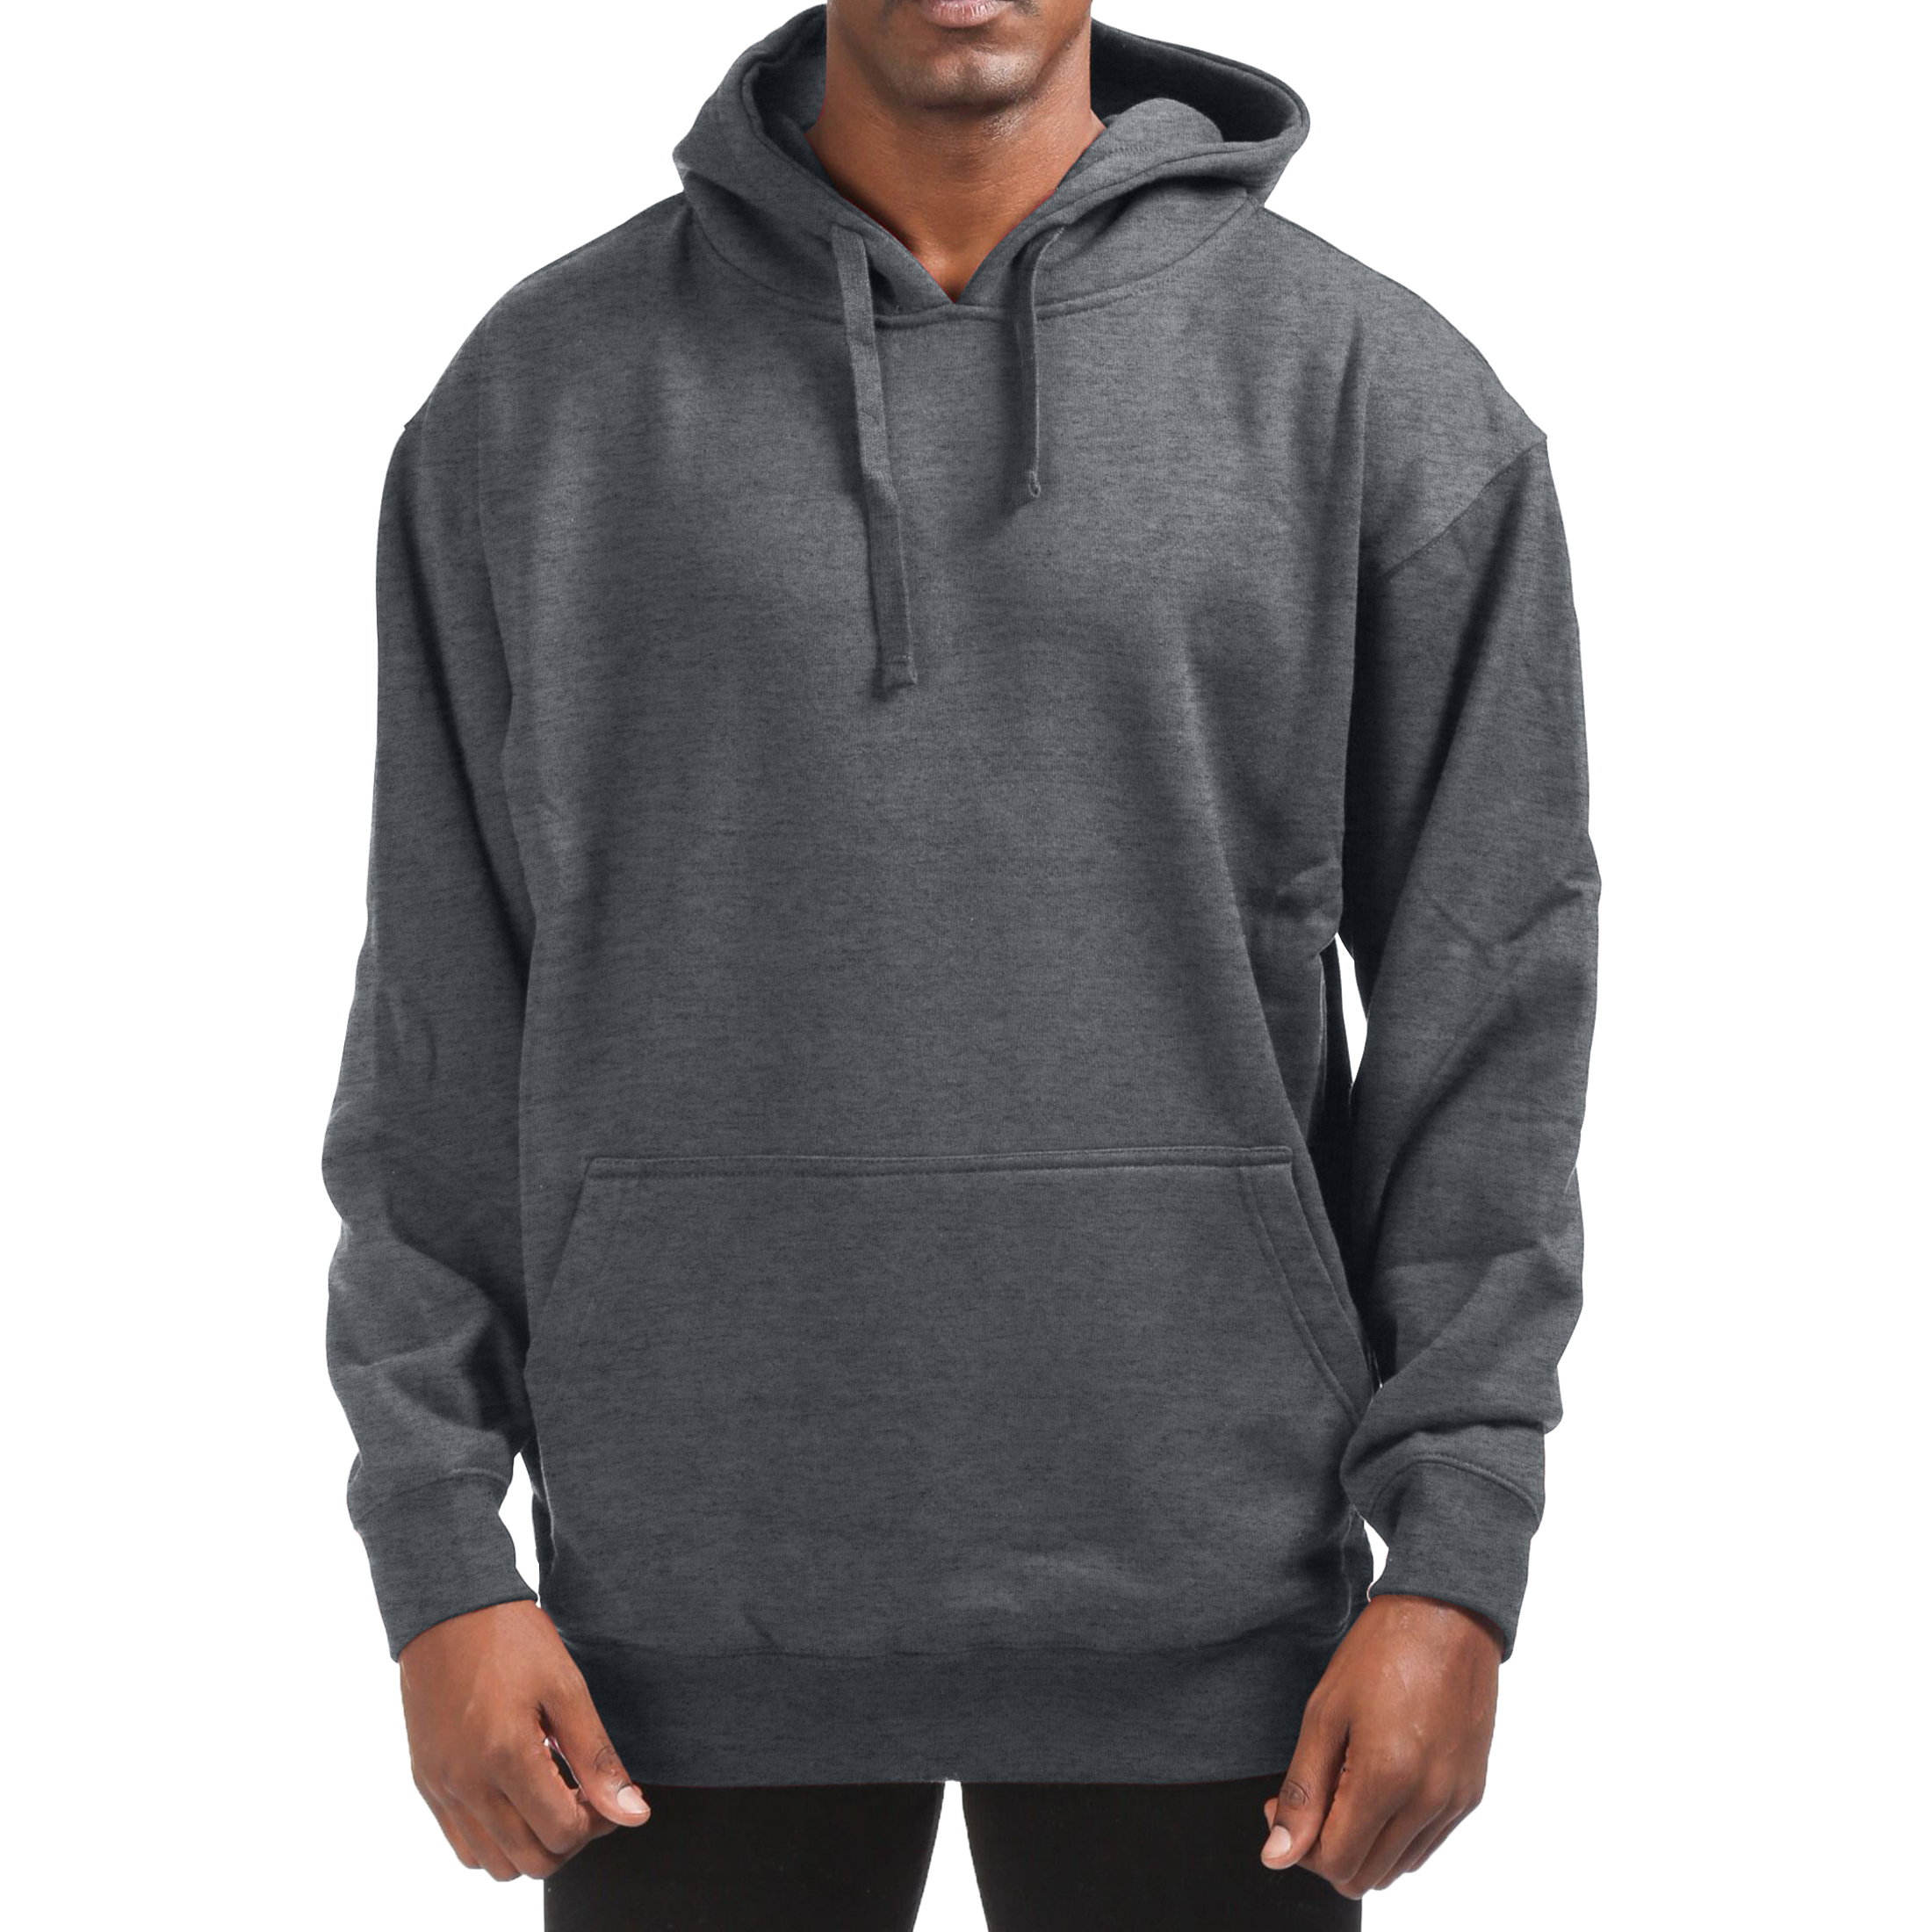 Men's Cotton-Blend Fleece Pullover Hoodie With Pocket (Big & Tall Sizes Available) - Charcoal, Medium